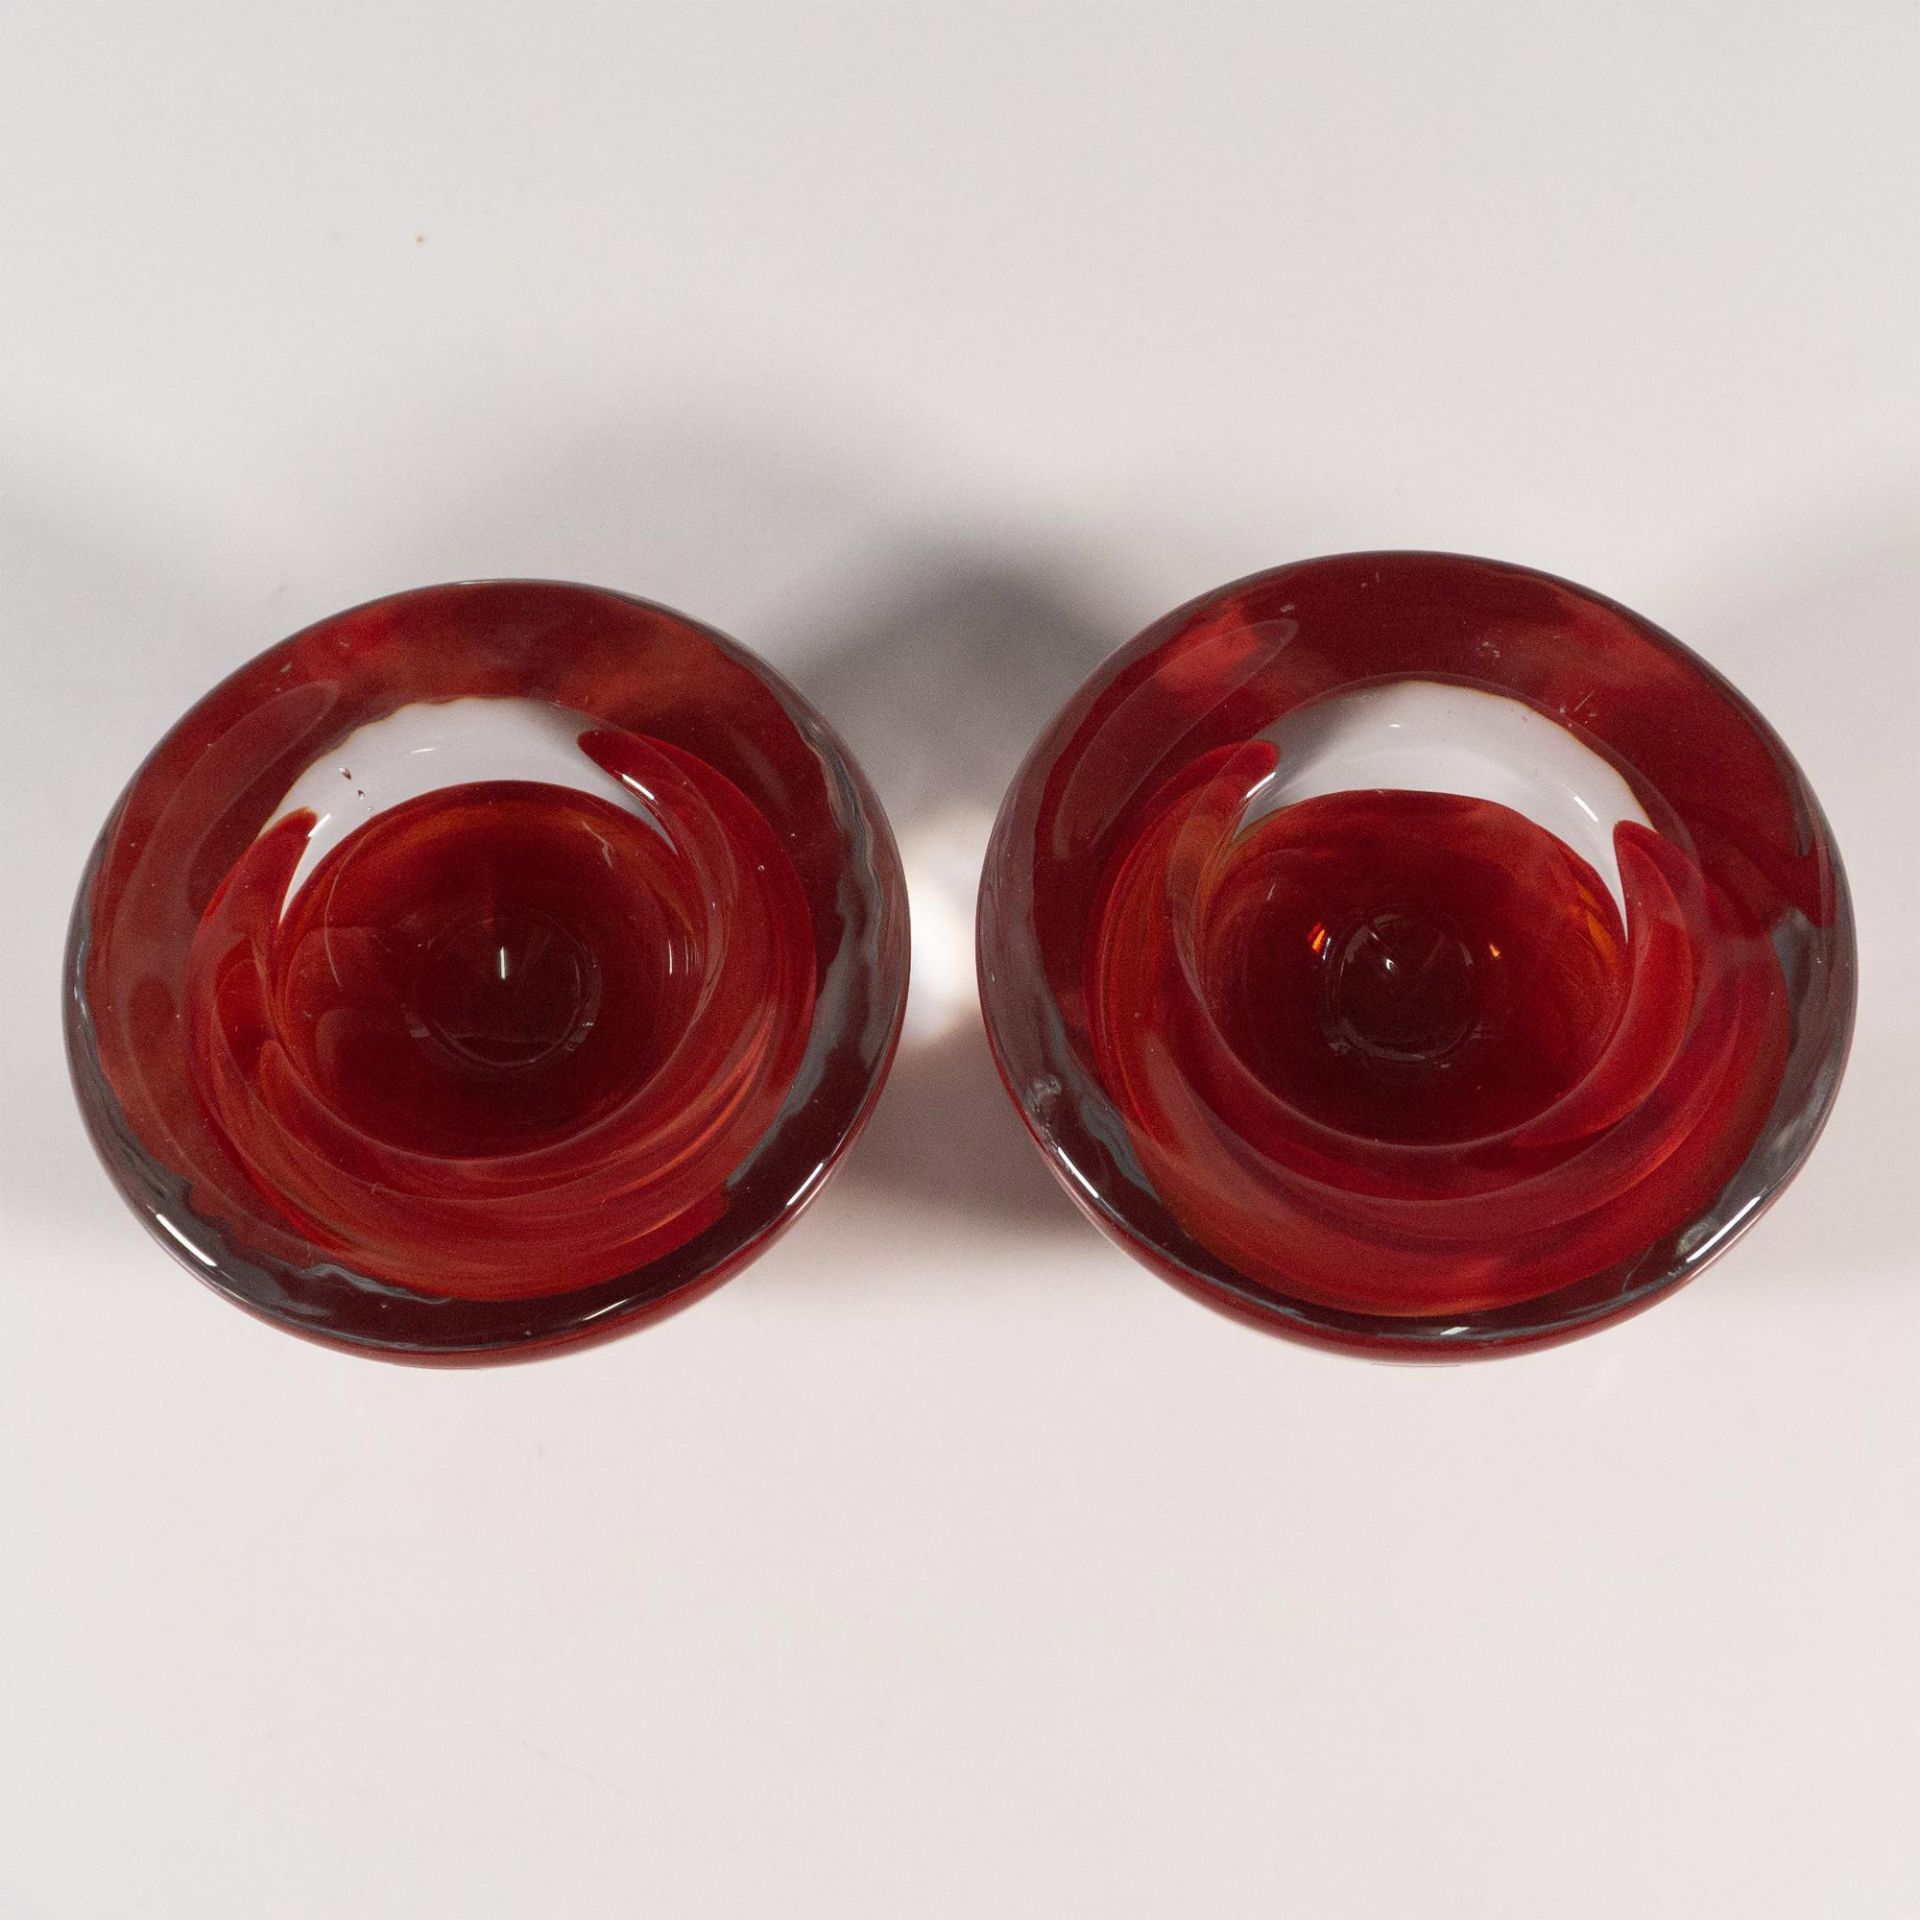 Pair of Kosta Boda by Anna Ehrner Candle Holders, Atoll - Image 3 of 4